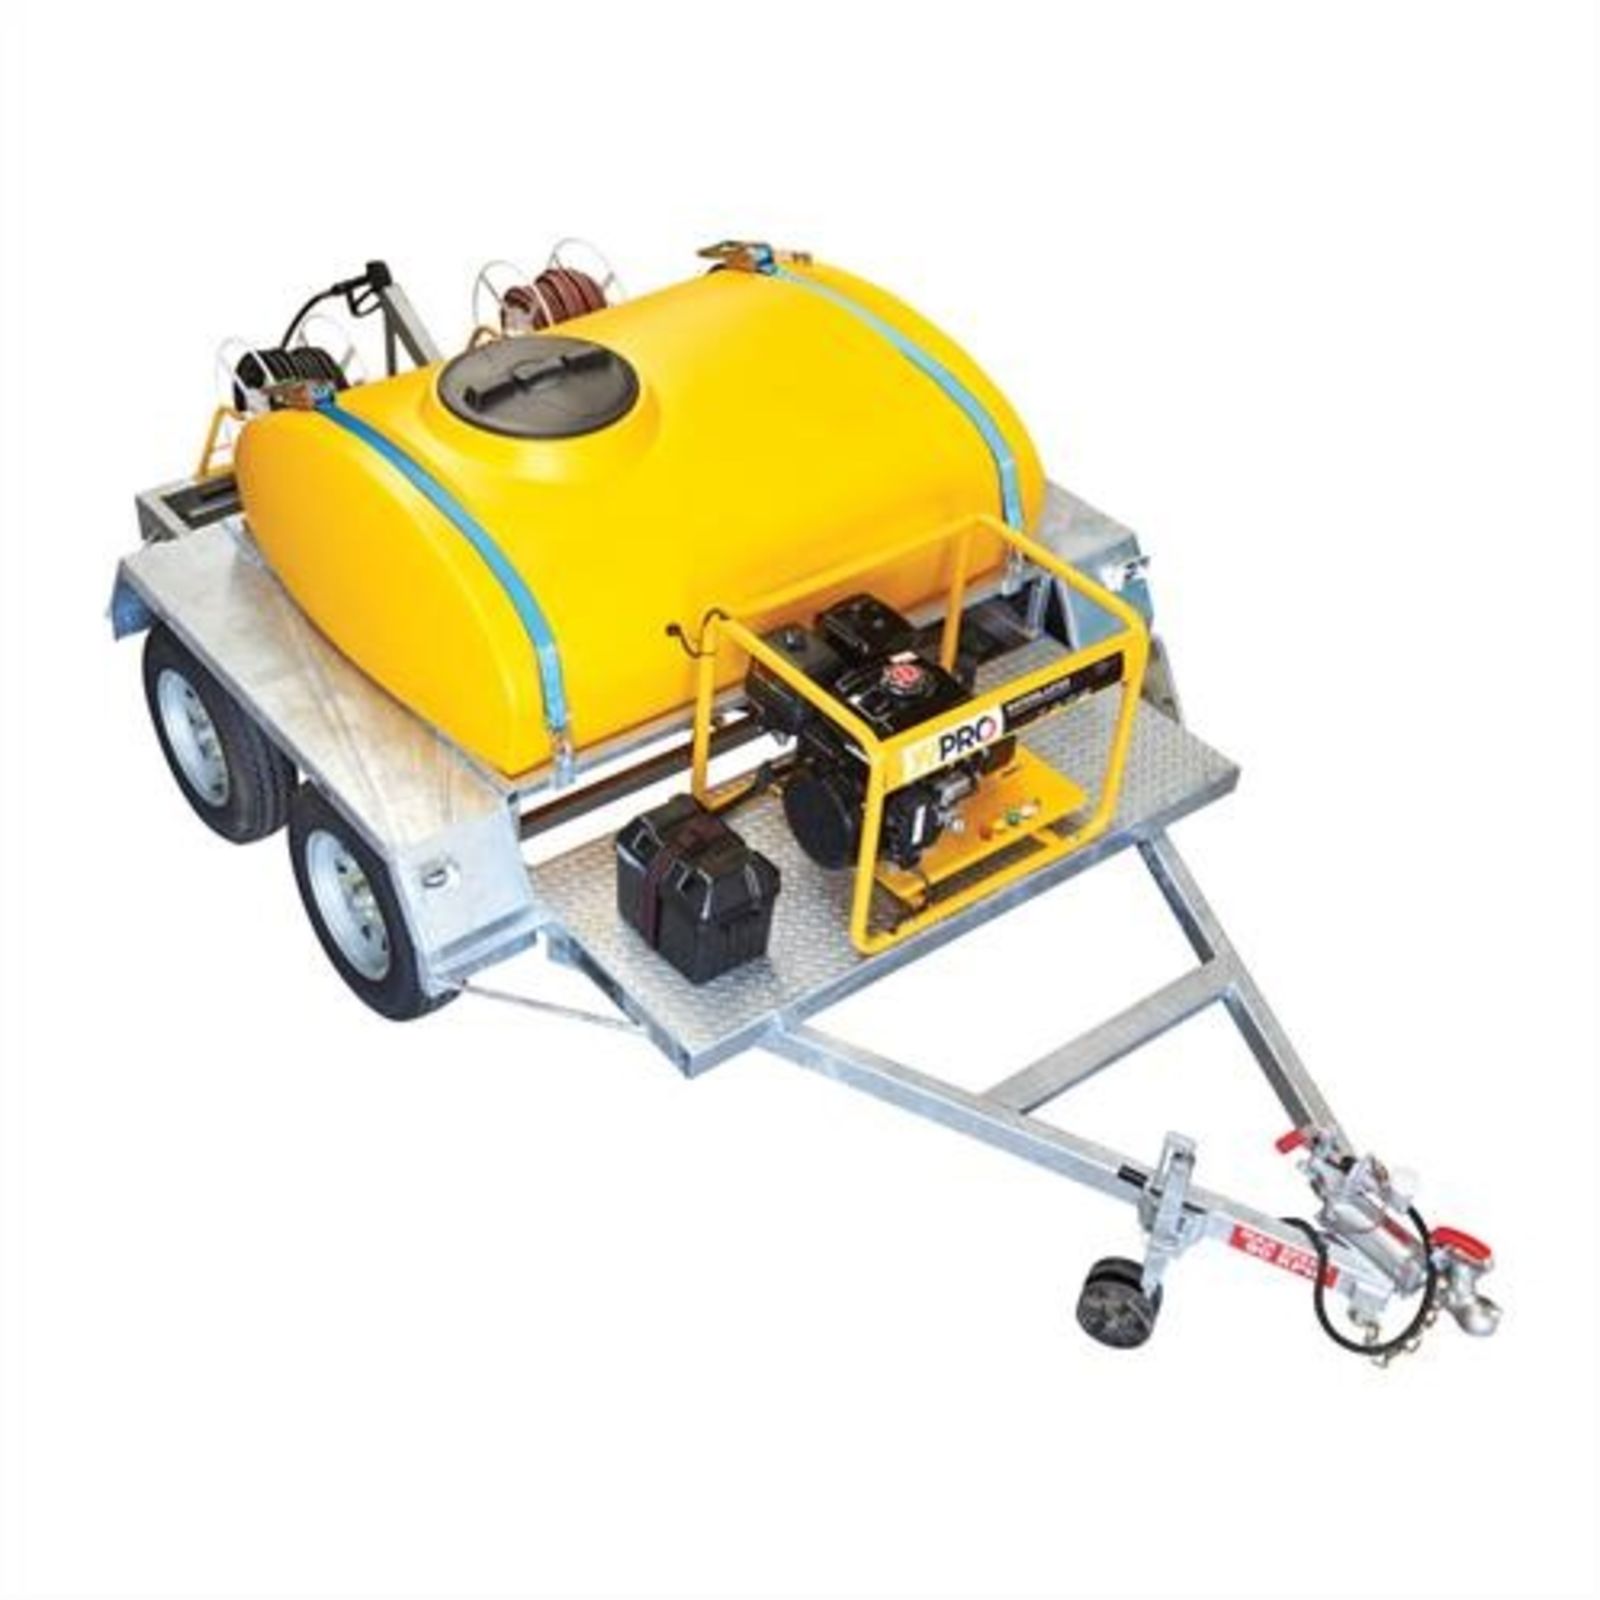 146M Water Blaster Towable with Spray Bar 3000 psi